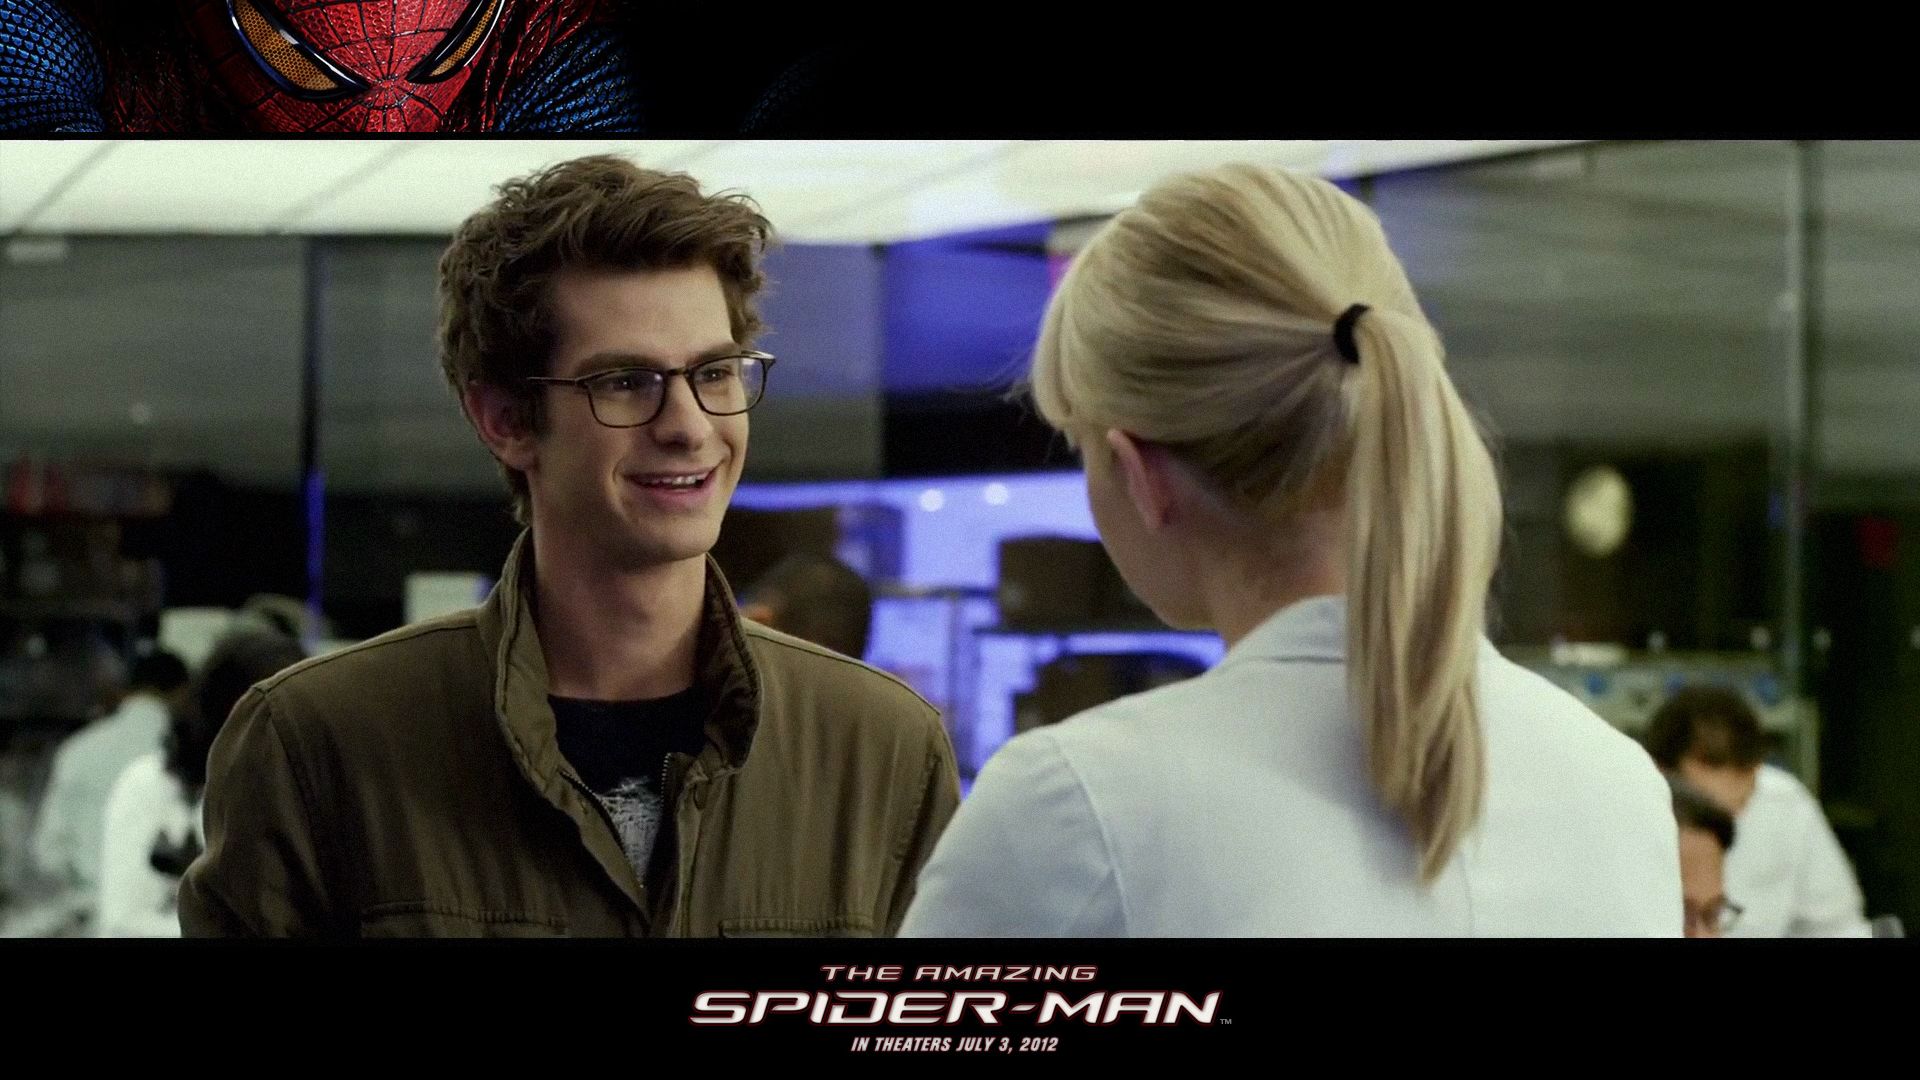 The Amazing Spiderman: Peter & Gwen wallpaper. The Amazing Spiderman: Peter & Gwen